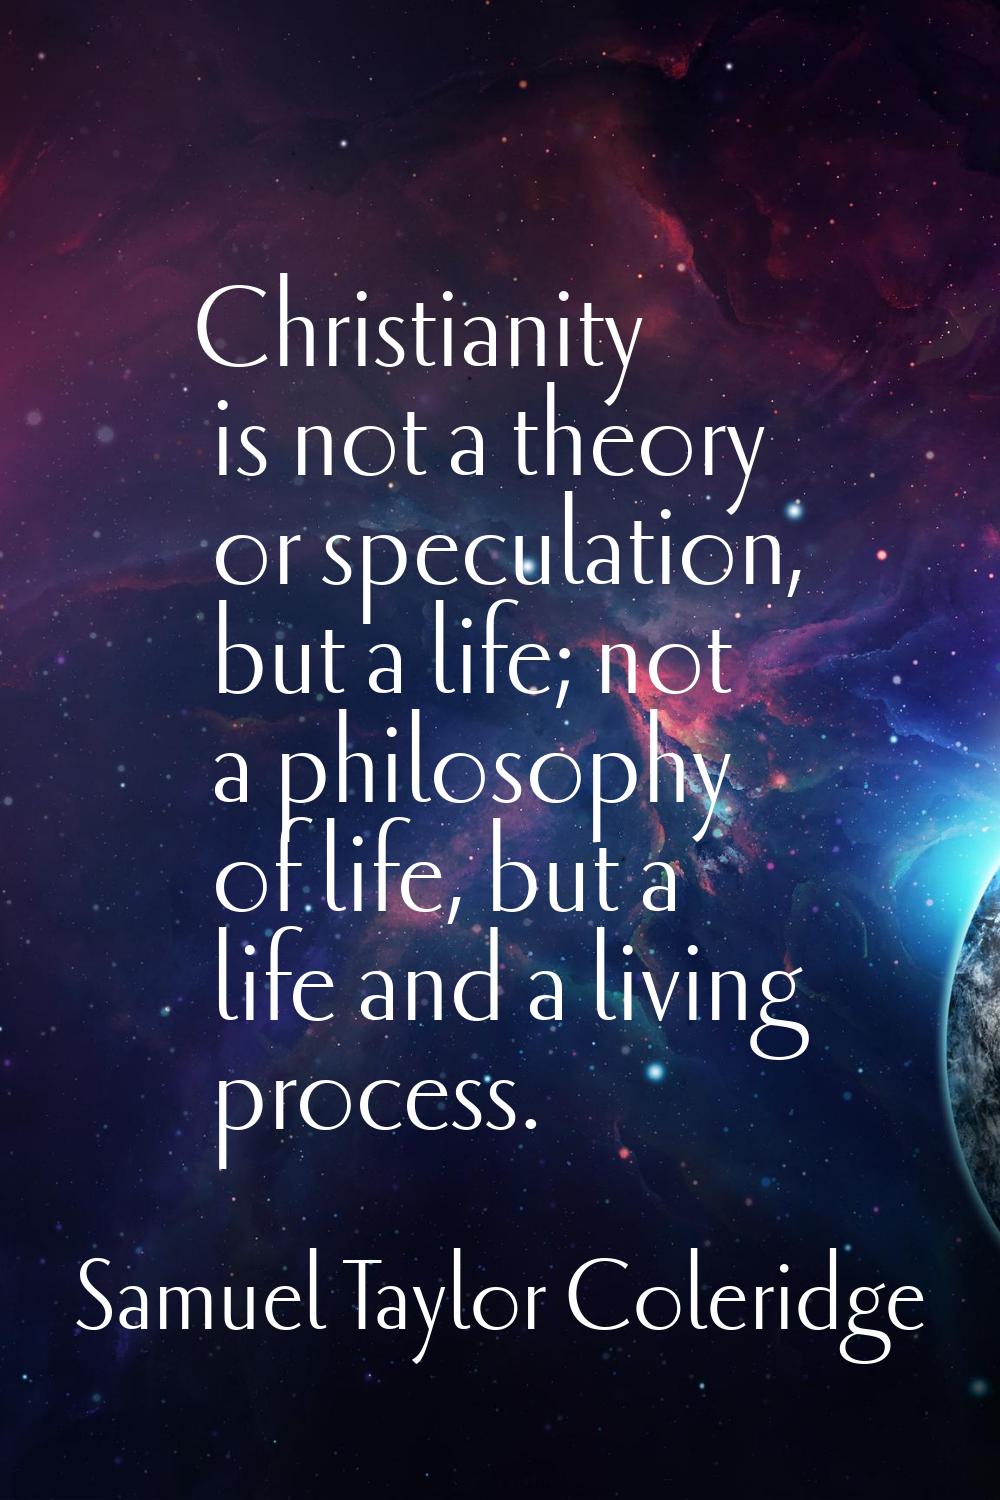 Christianity is not a theory or speculation, but a life; not a philosophy of life, but a life and a